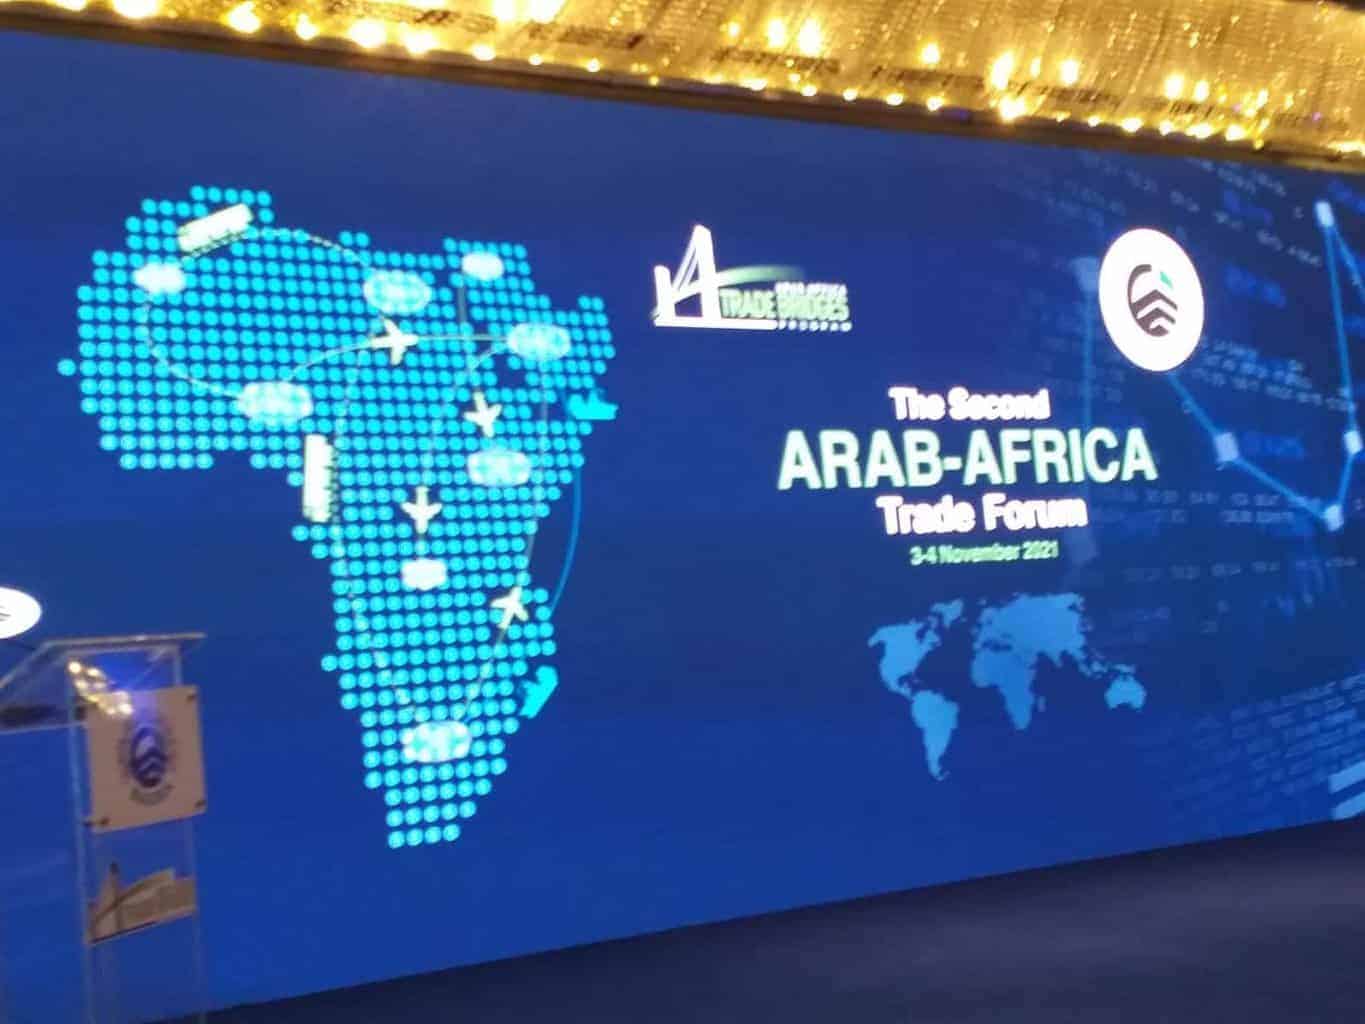 ICDT’s DG participated in the 2nd Arab Africa Trade Forum